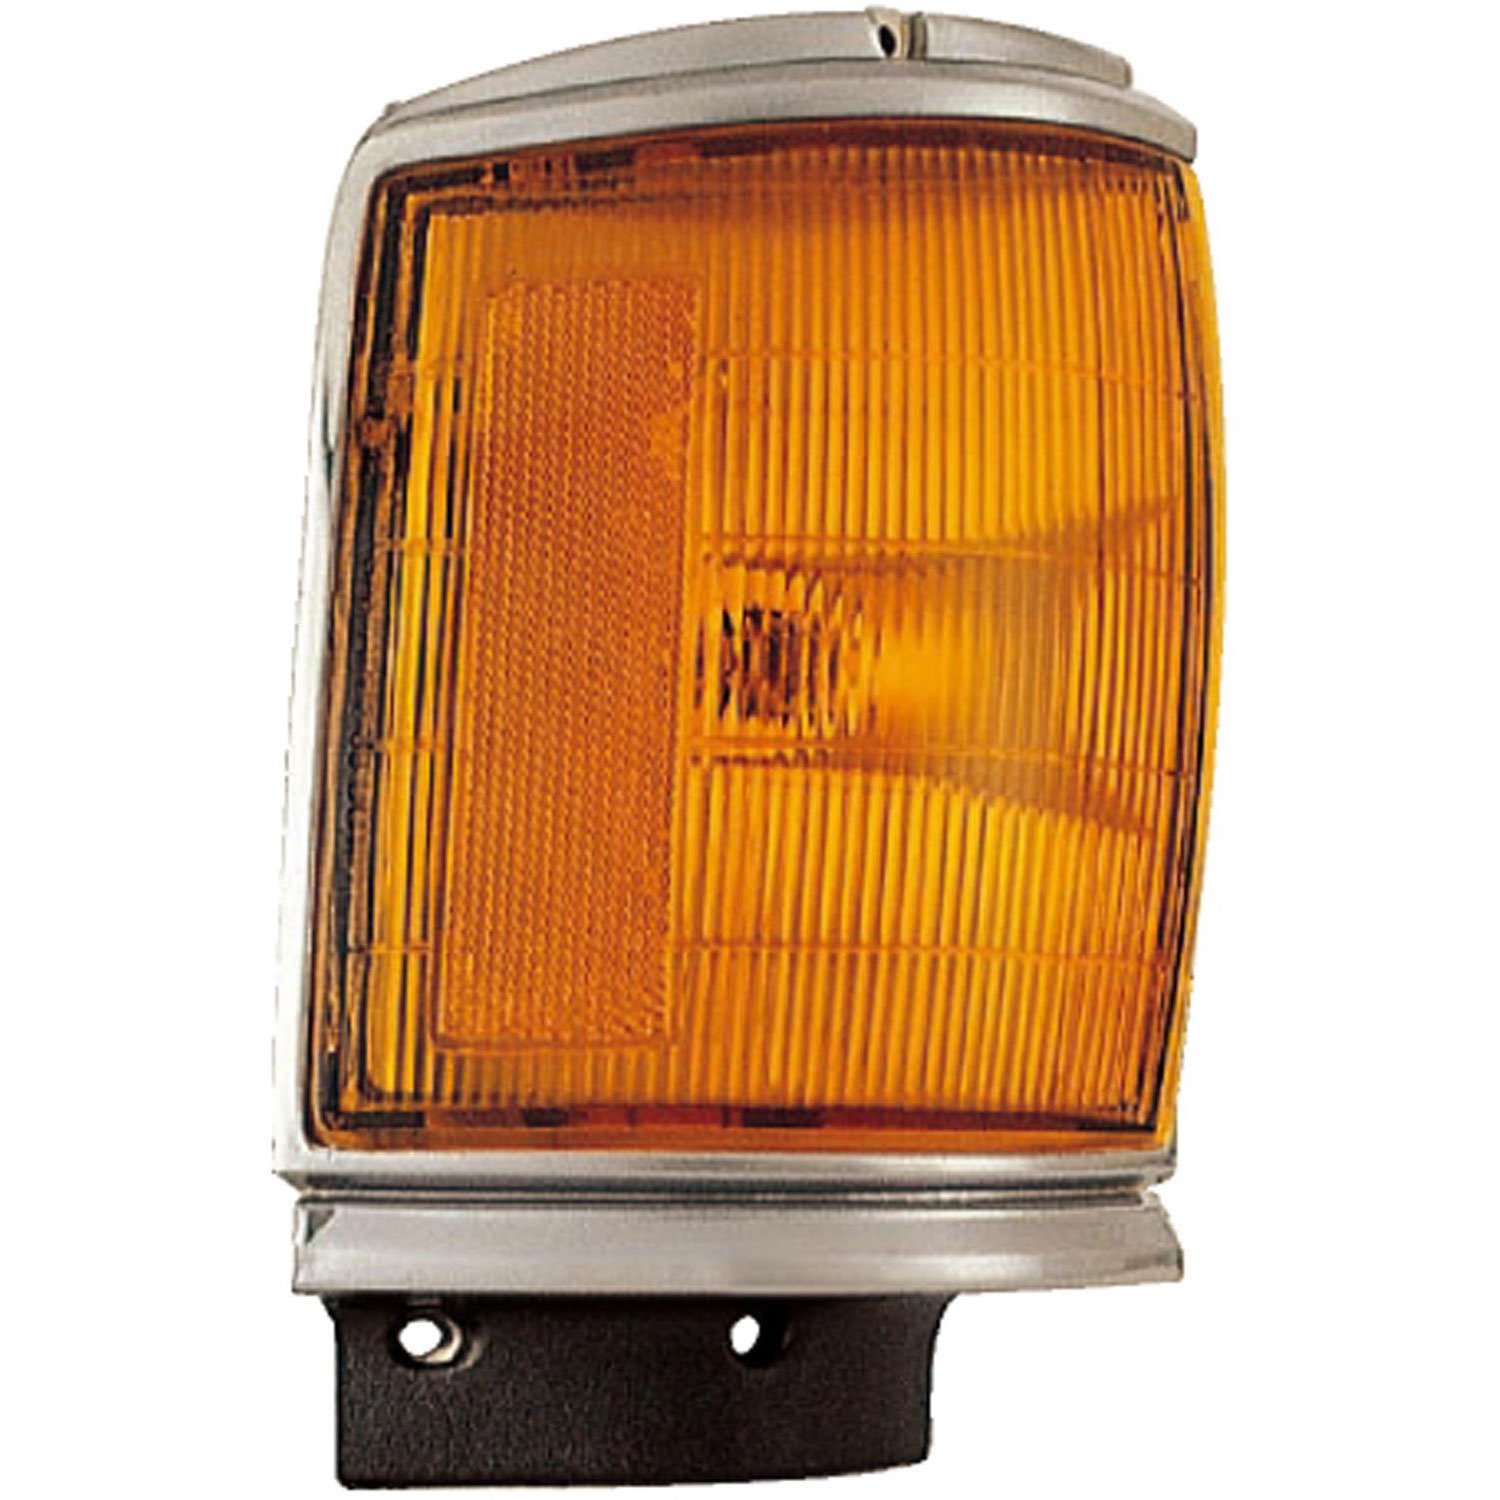 Parking / Turn Signal Lamp Assembly for 1987-1988 Toyota Pickup Truck (Standard Cab) RWD